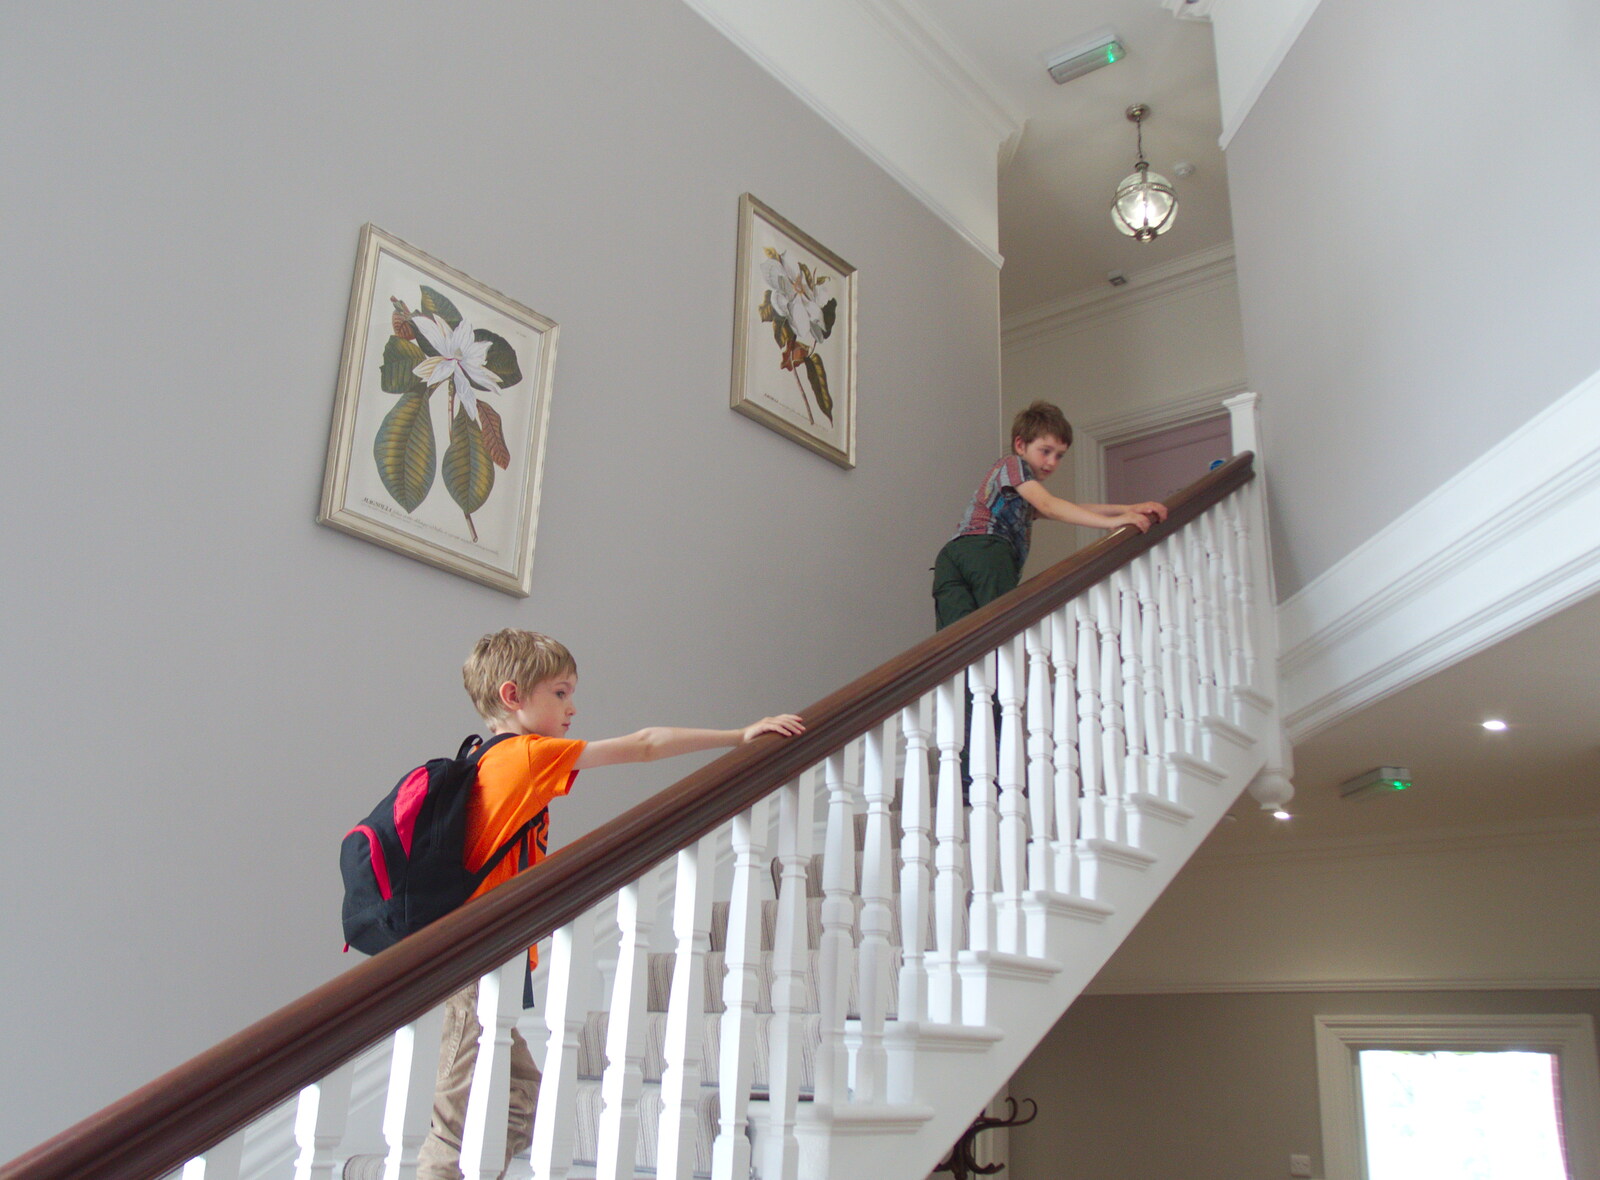 The boys climb the grand staircase from Chagford Lido and a Trip to Parke, Bovey Tracey, Devon - 25th May 2019